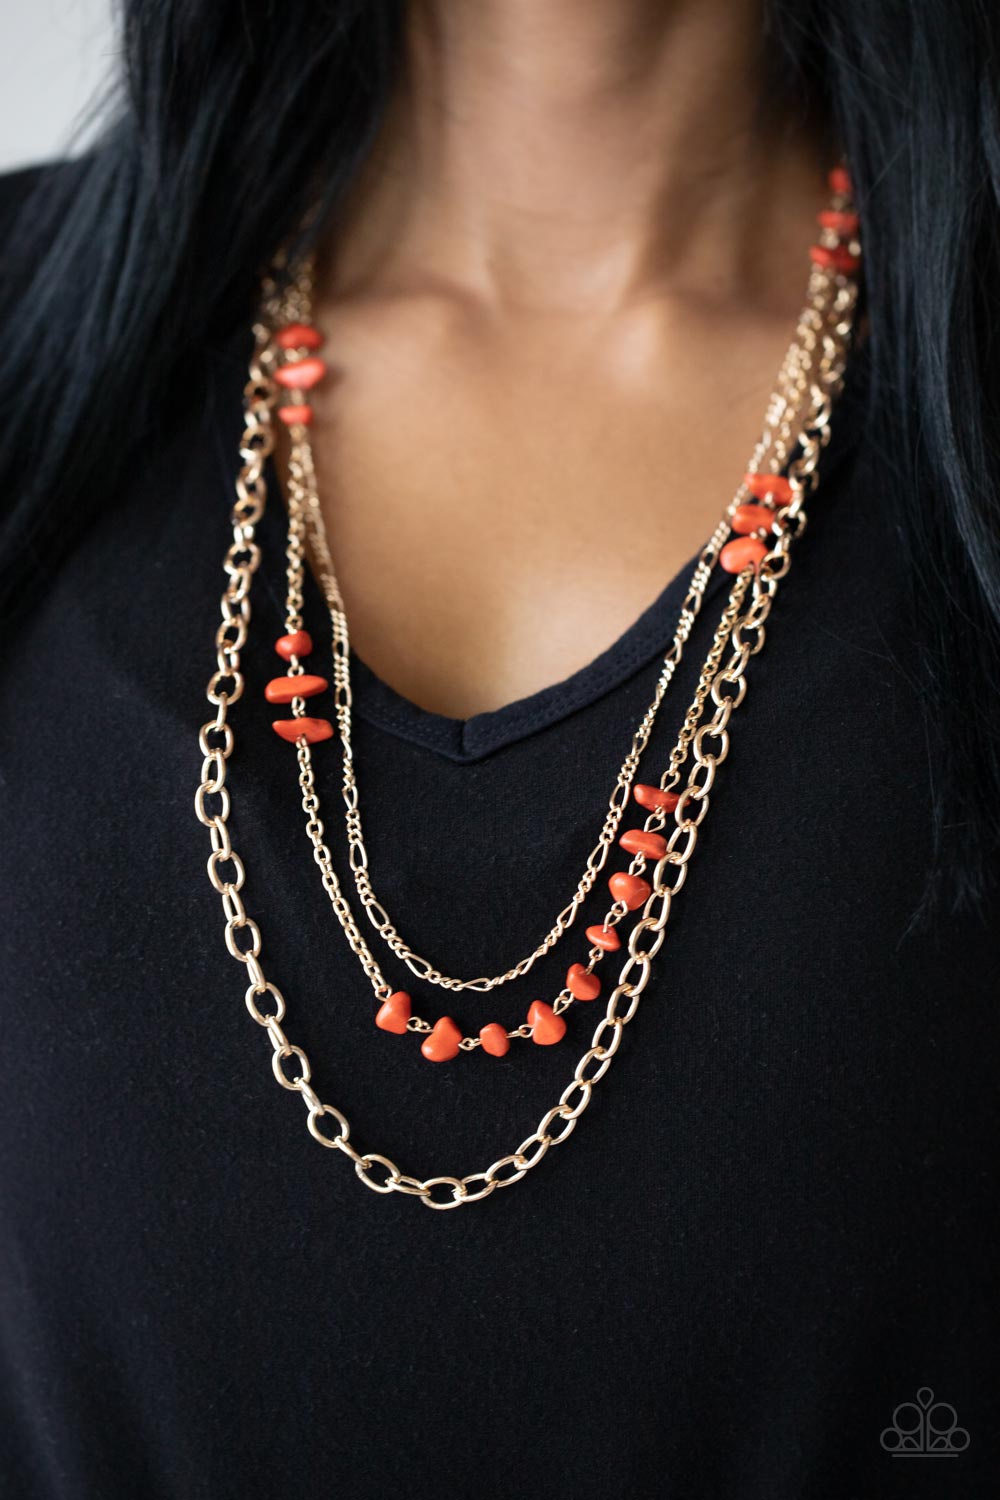 Artisinal Abundance - Orange Stone Necklaces infused with sections of refreshing orange stones, a trio of mismatched gold chains layer down the chest for a dash of earthy refinement. Features an adjustable clasp closure.  Sold as one individual necklace. Includes one pair of matching earrings.